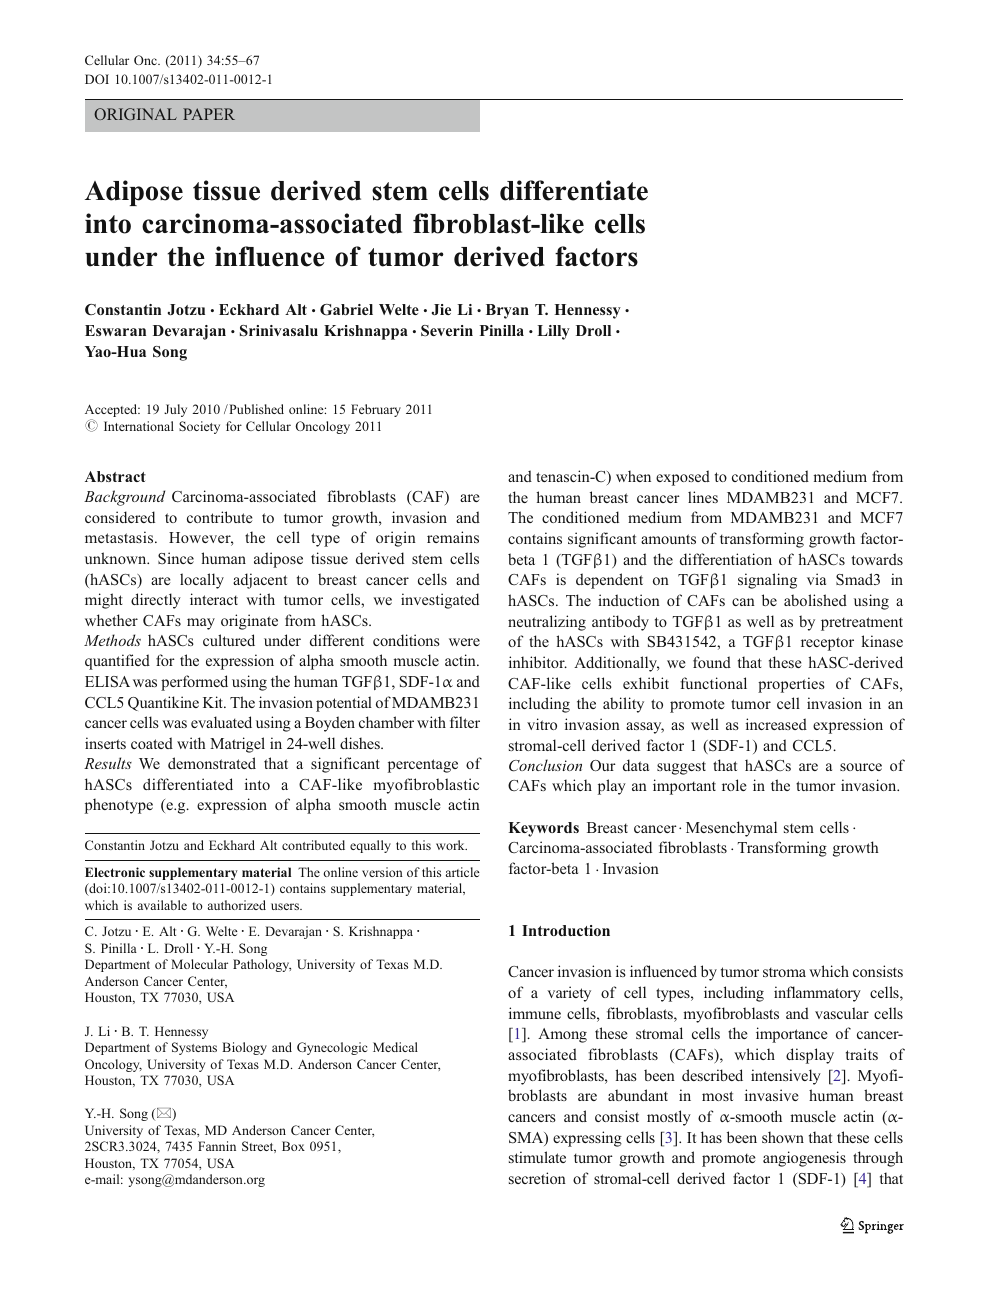 Adipose Tissue Derived Stem Cells Differentiate Into Carcinoma Associated Fibroblast Like Cells Under The Influence Of Tumor Derived Factors Topic Of Research Paper In Biological Sciences Download Scholarly Article Pdf And Read For